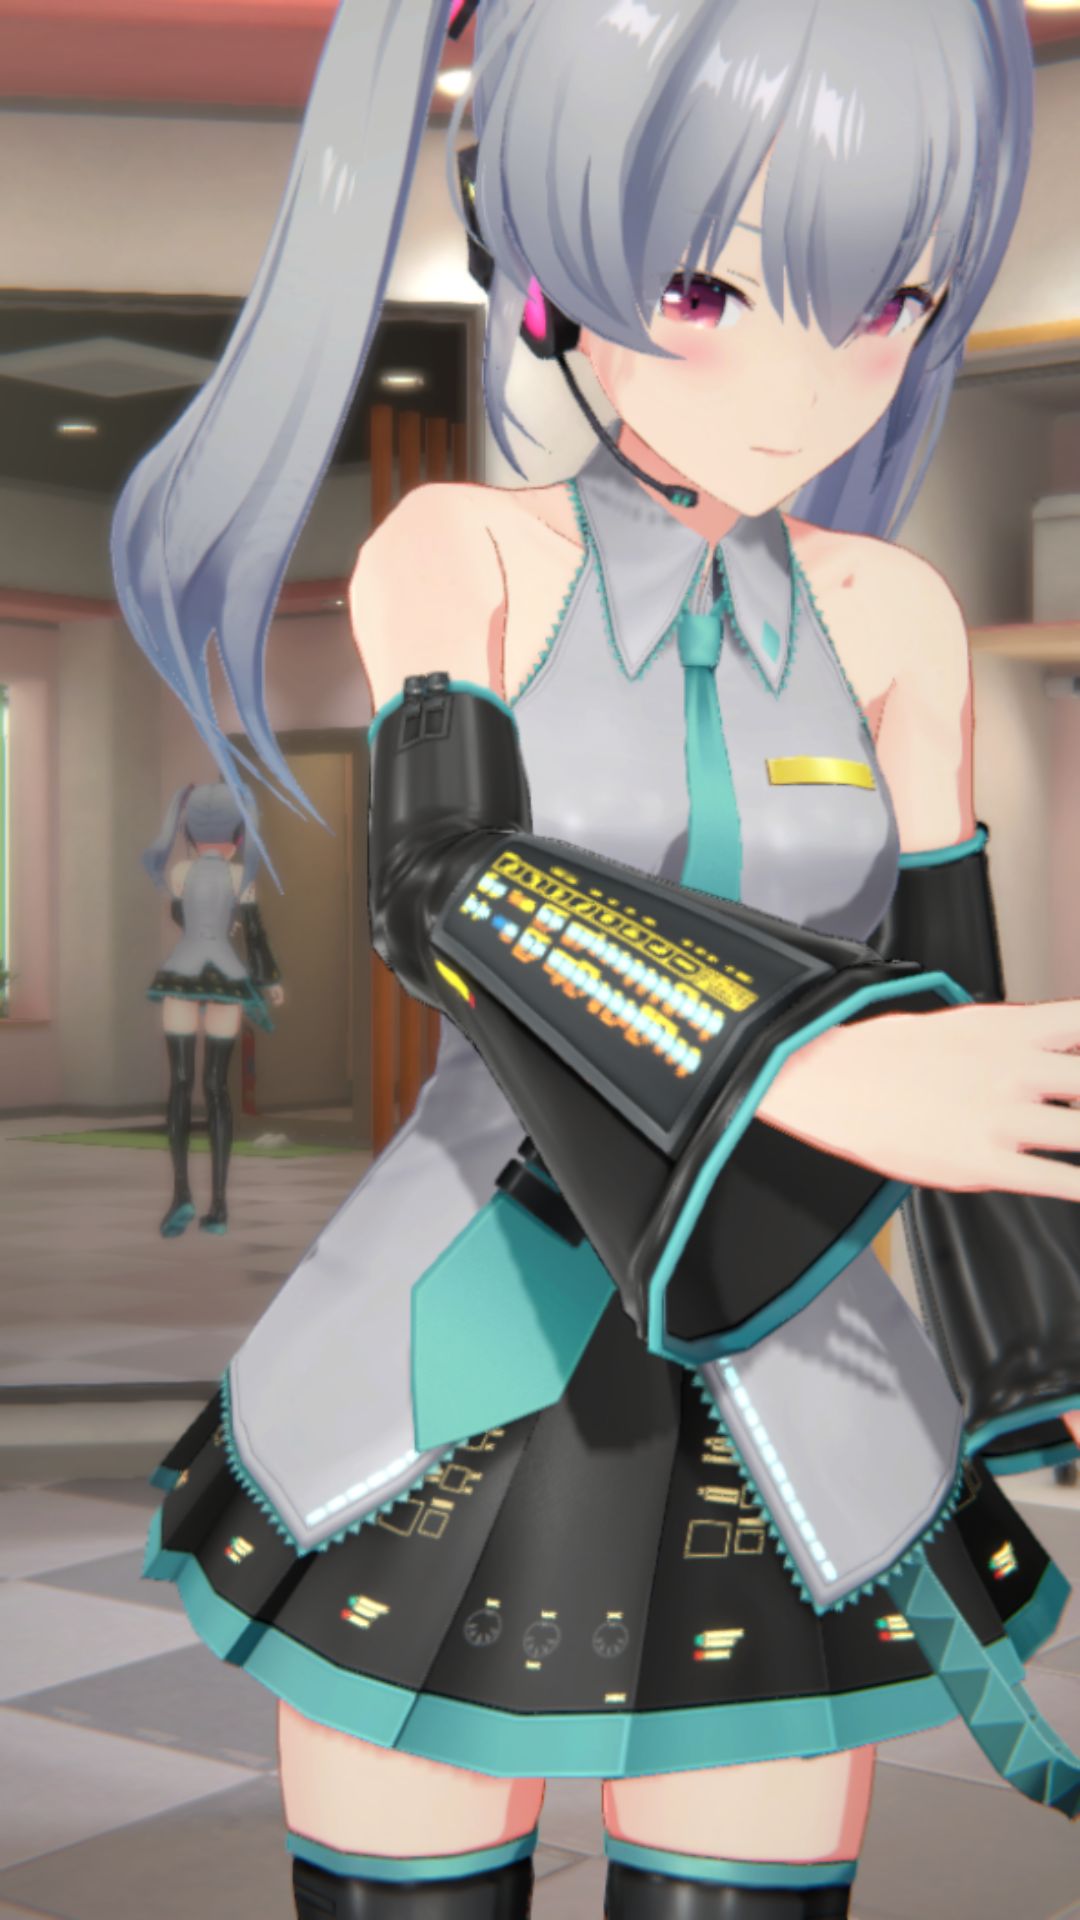 The result of peeking into the contents of the skirt of the smartphone game "IDOLY PRIDE" Hatsune Miku and Hatsune Miku costume 9